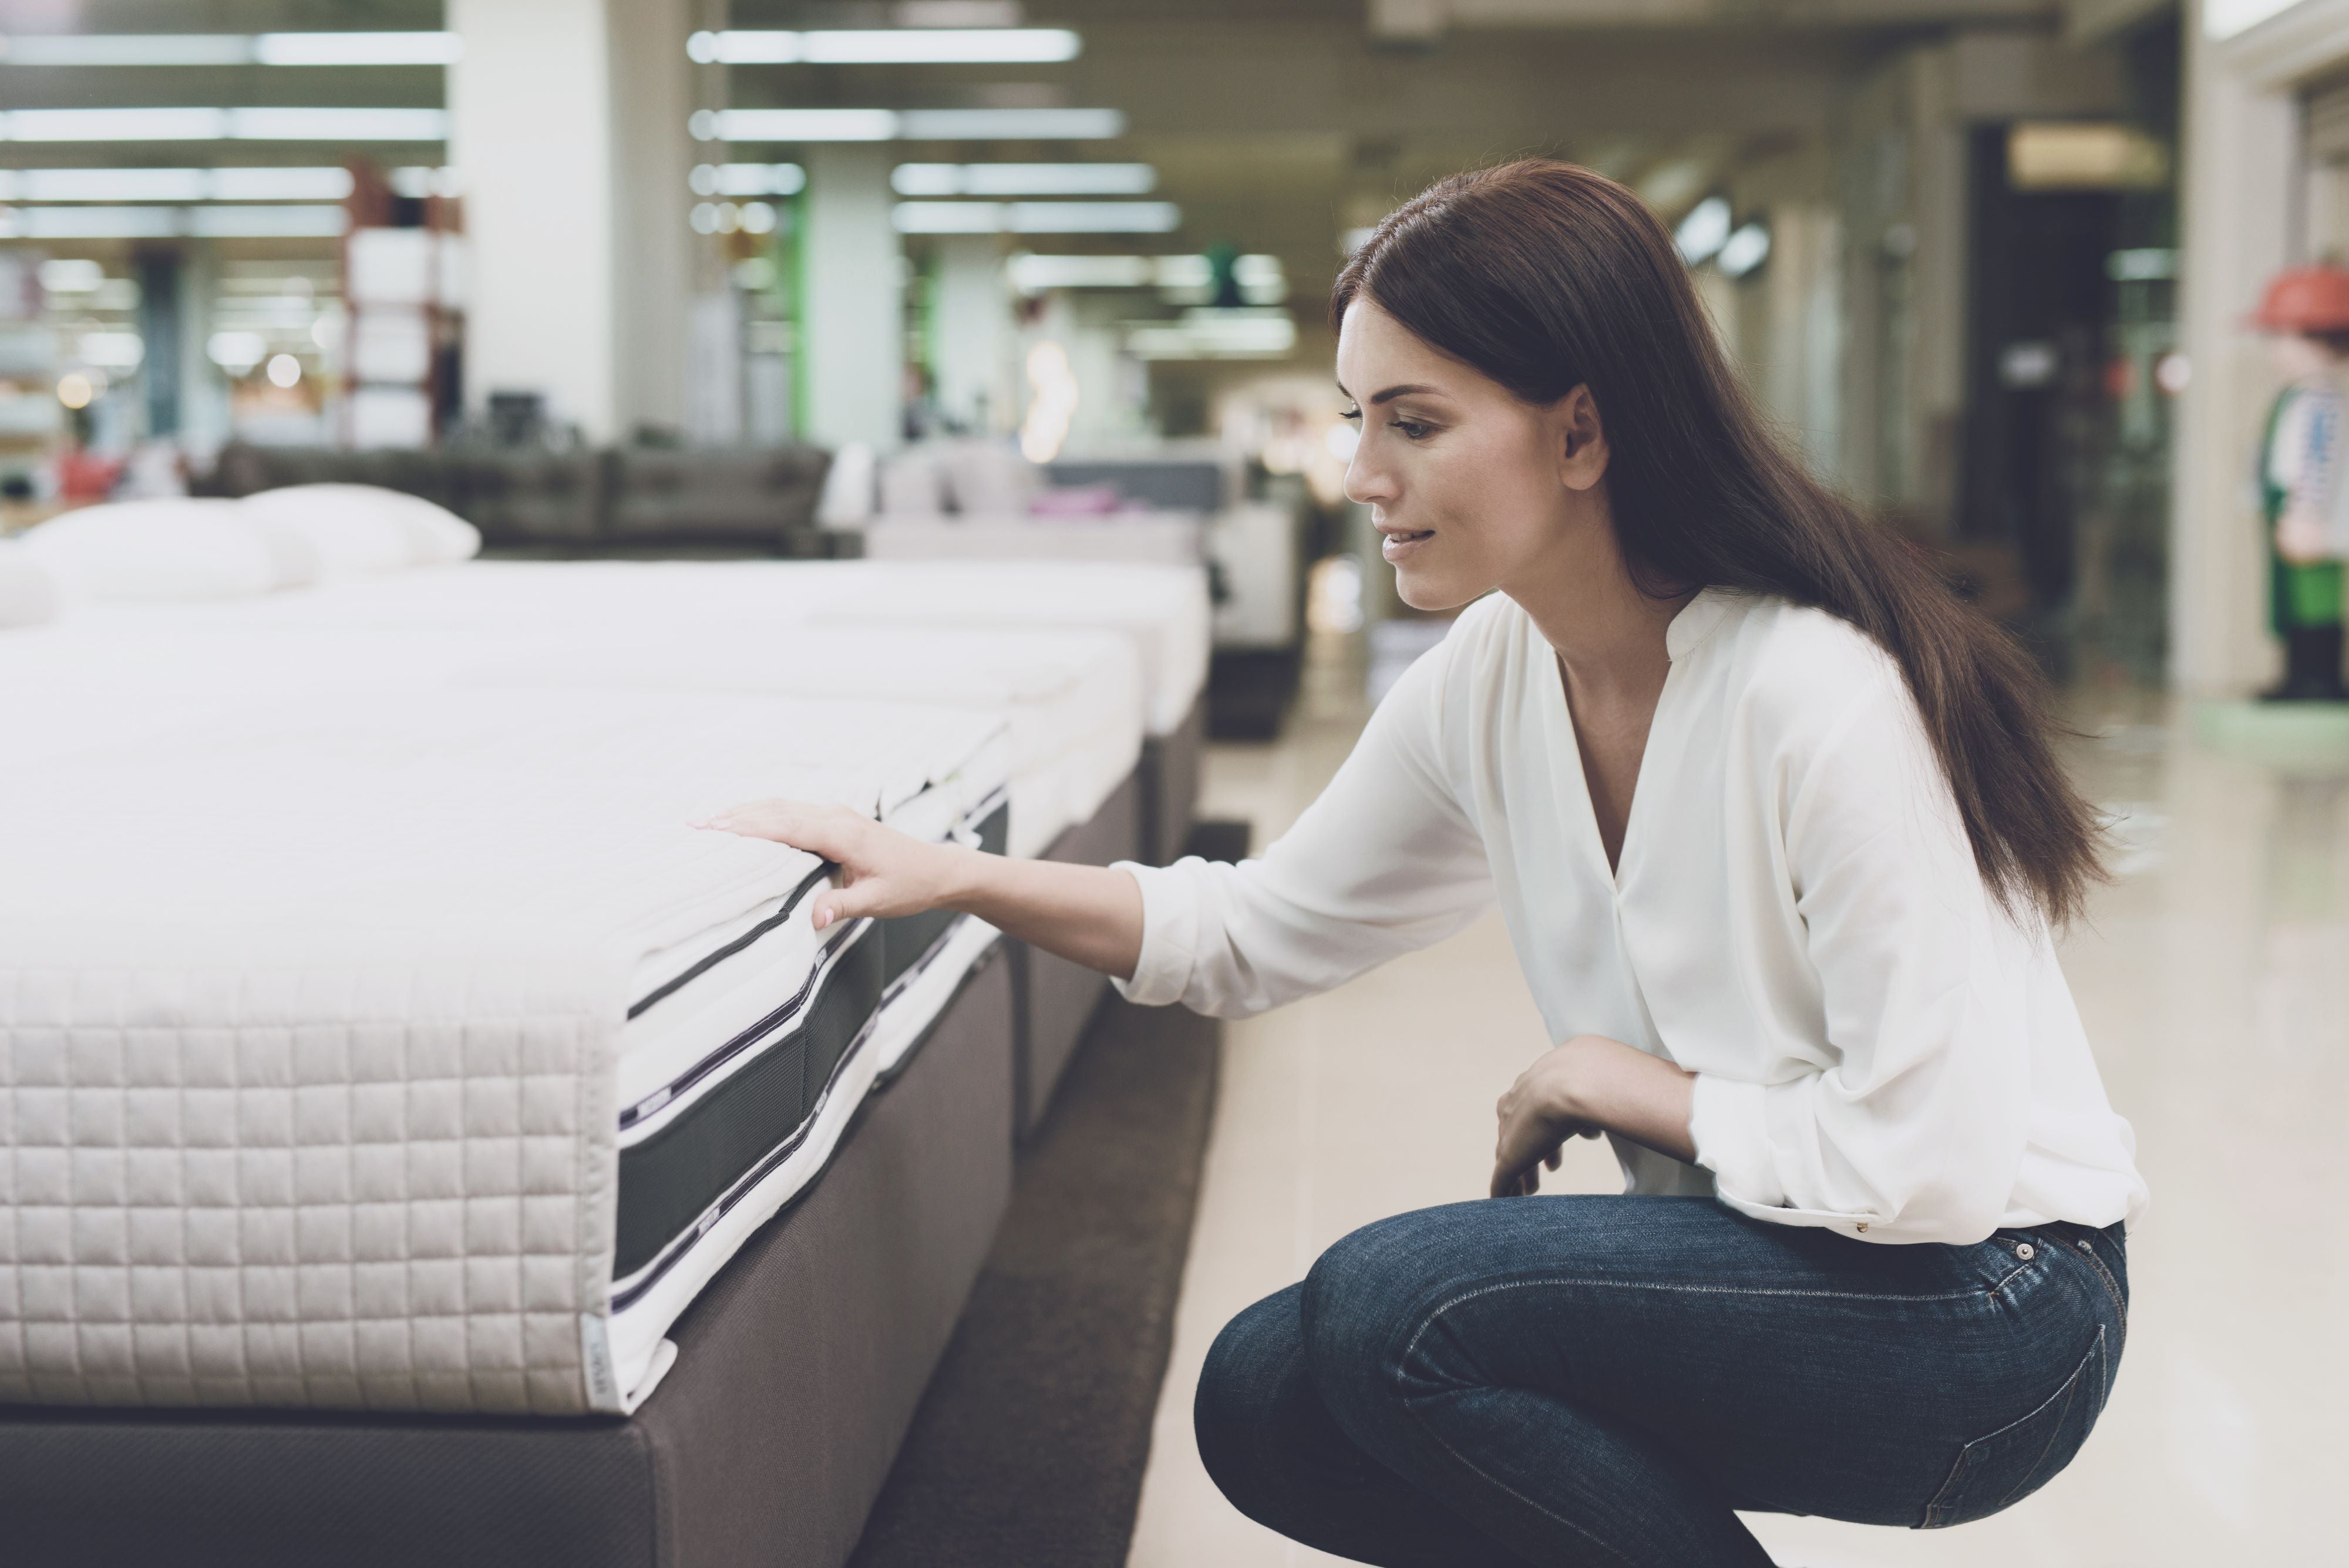 A woman chooses a mattress in a store, she sits next to it and examines it